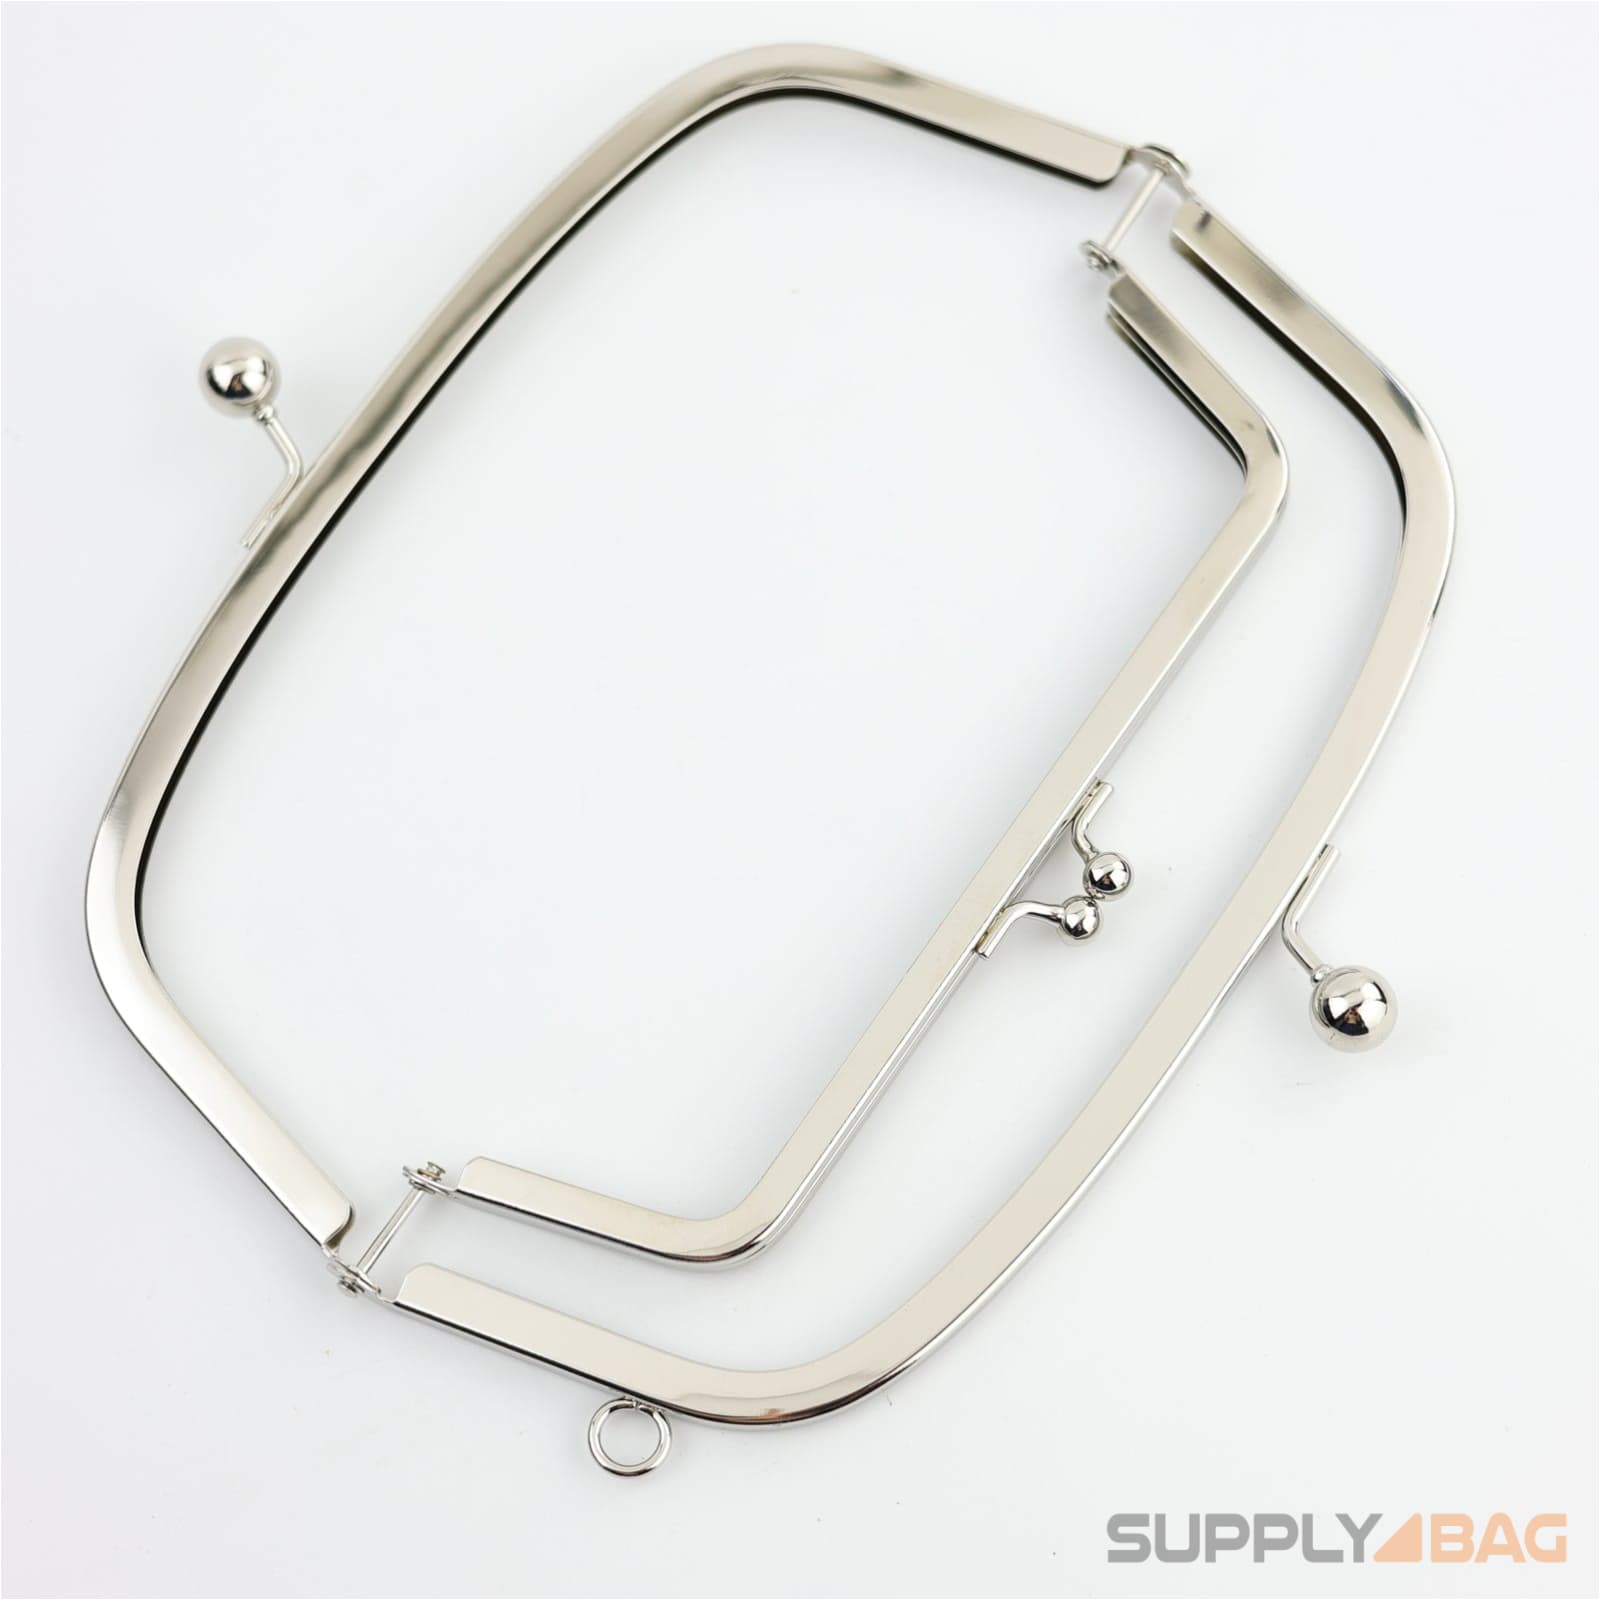 8.5 inch Silver Double Kisslock Metal Purse Frame with O Ring